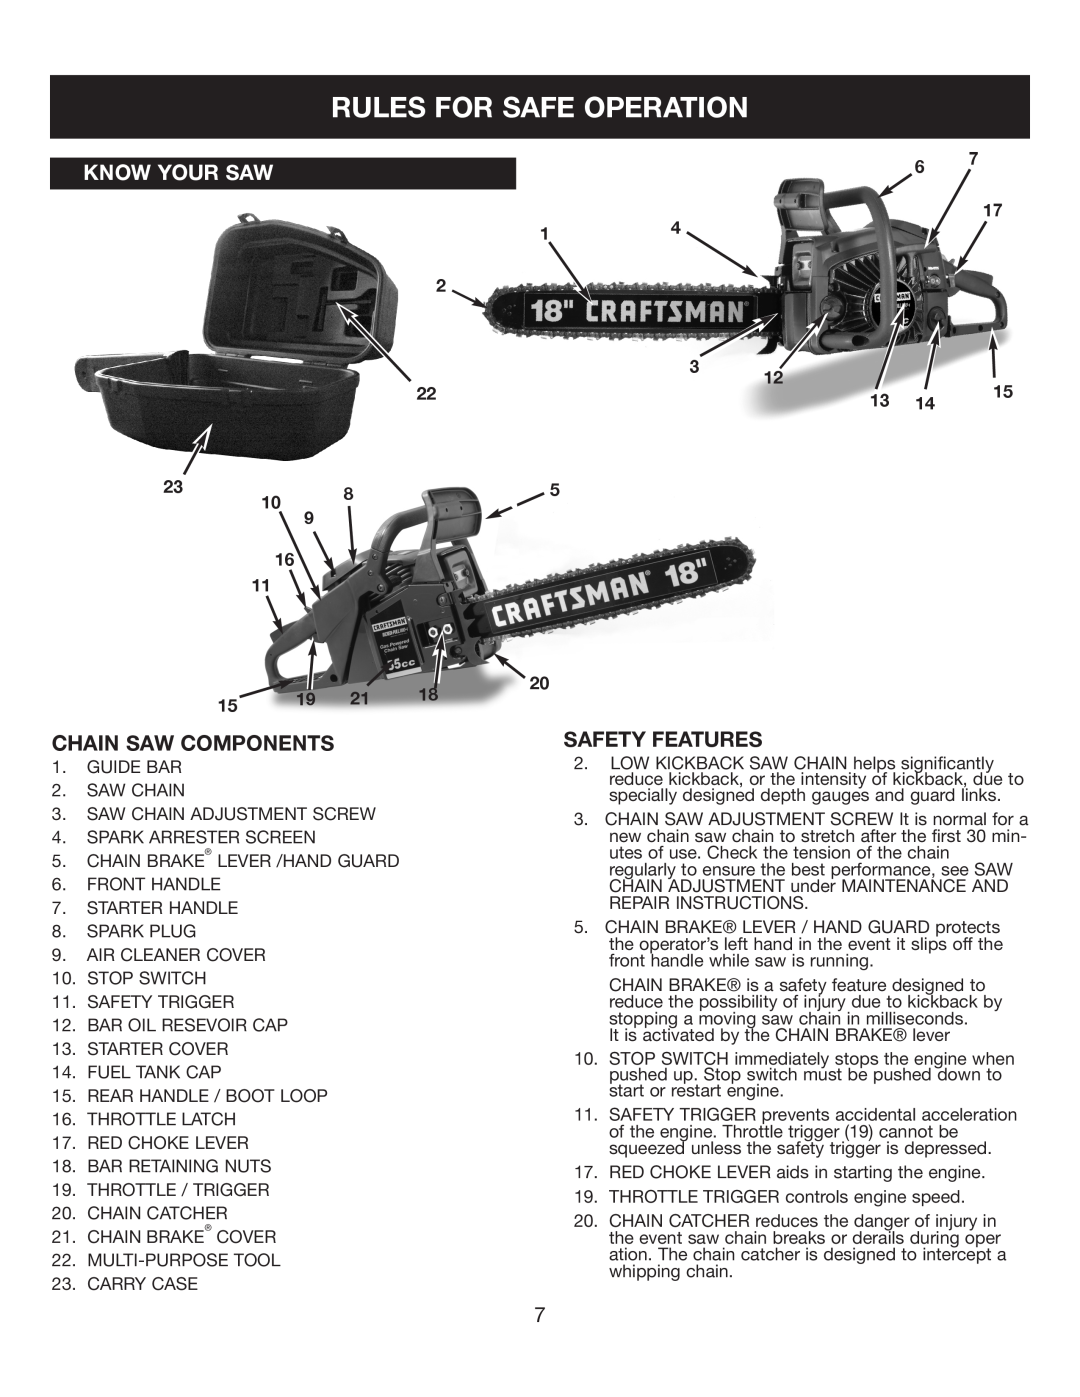 Sears 316.35084 manual Rules For Safe Operation, Know Your Saw, Chain Saw Components, Safety Features 